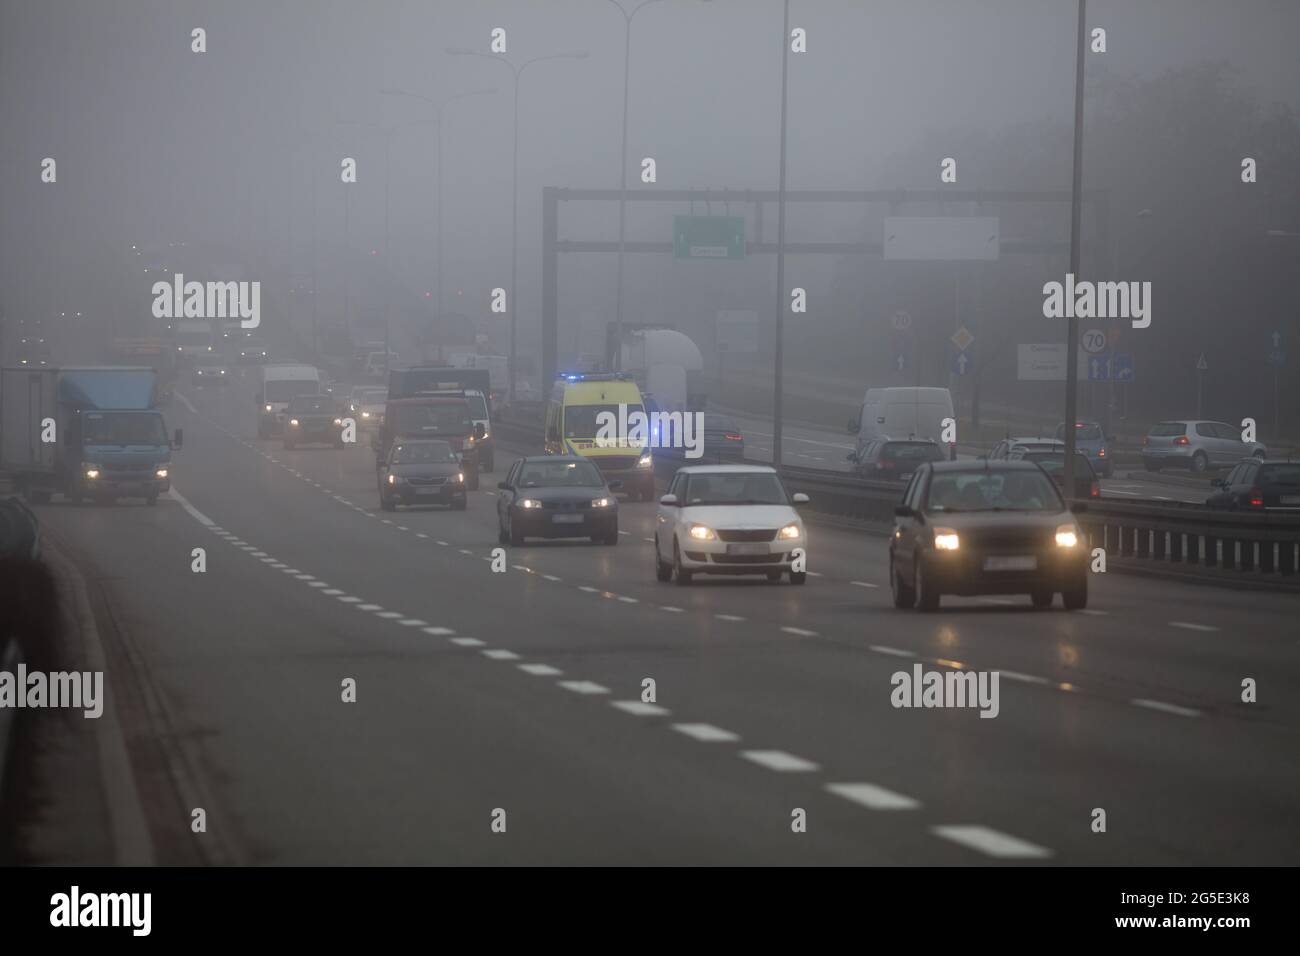 Driving a car in bad weather conditions, foggy day on the road Stock Photo